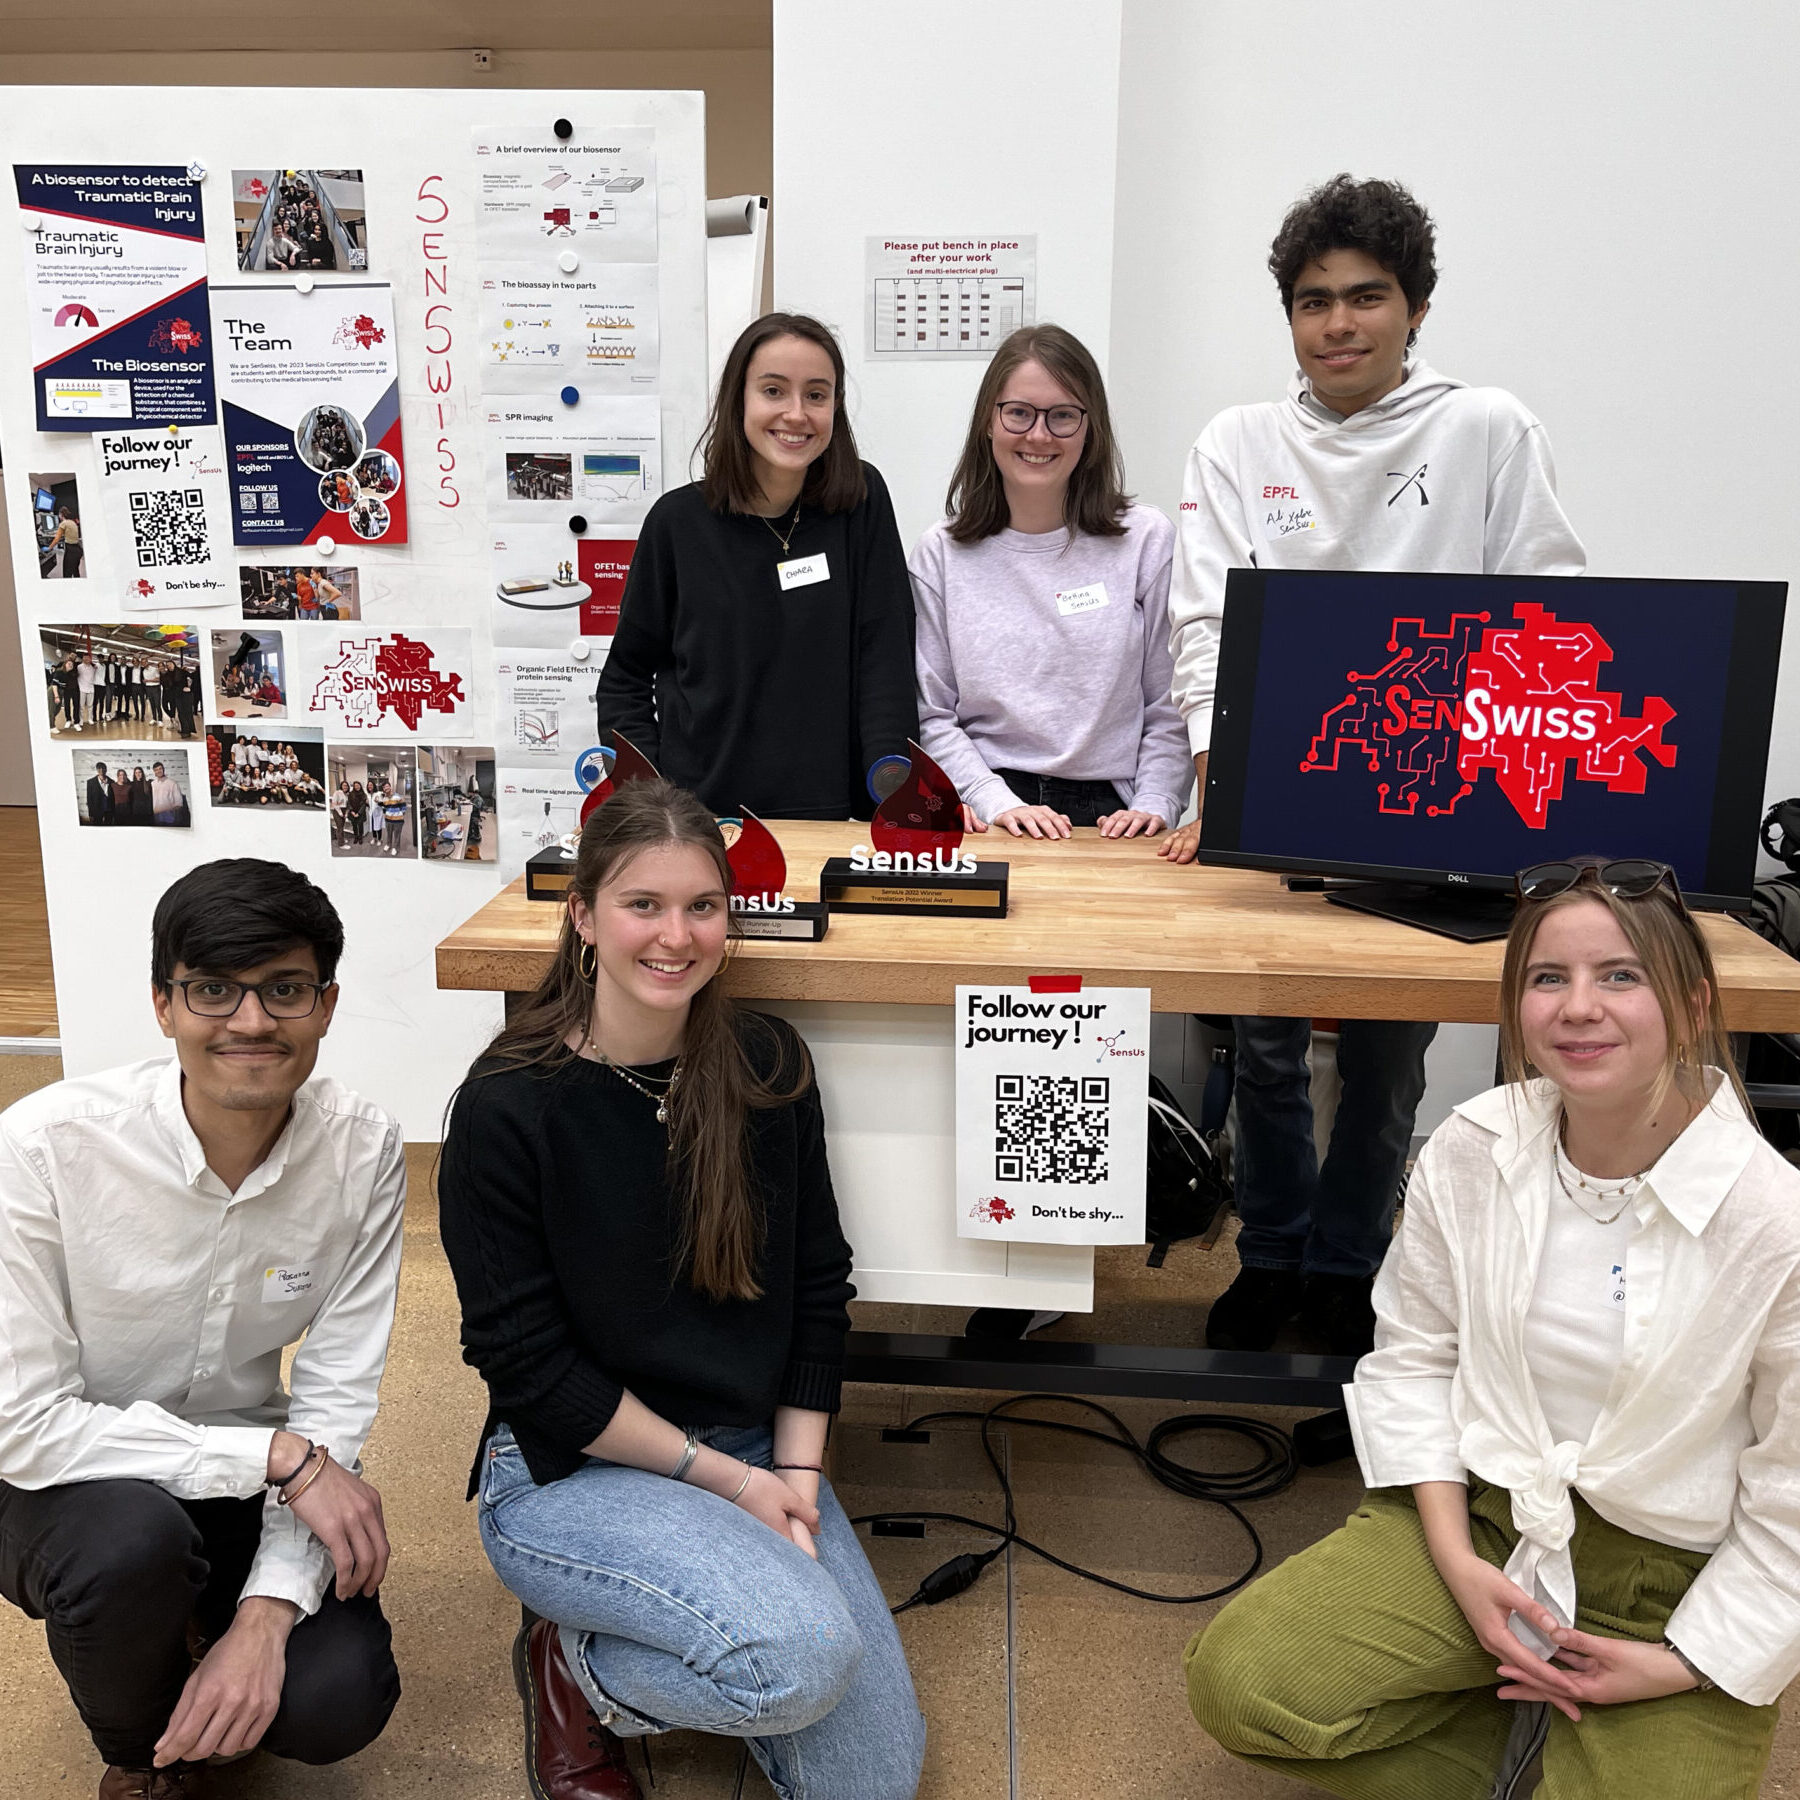 The team booth for the EPFL 2023 open days